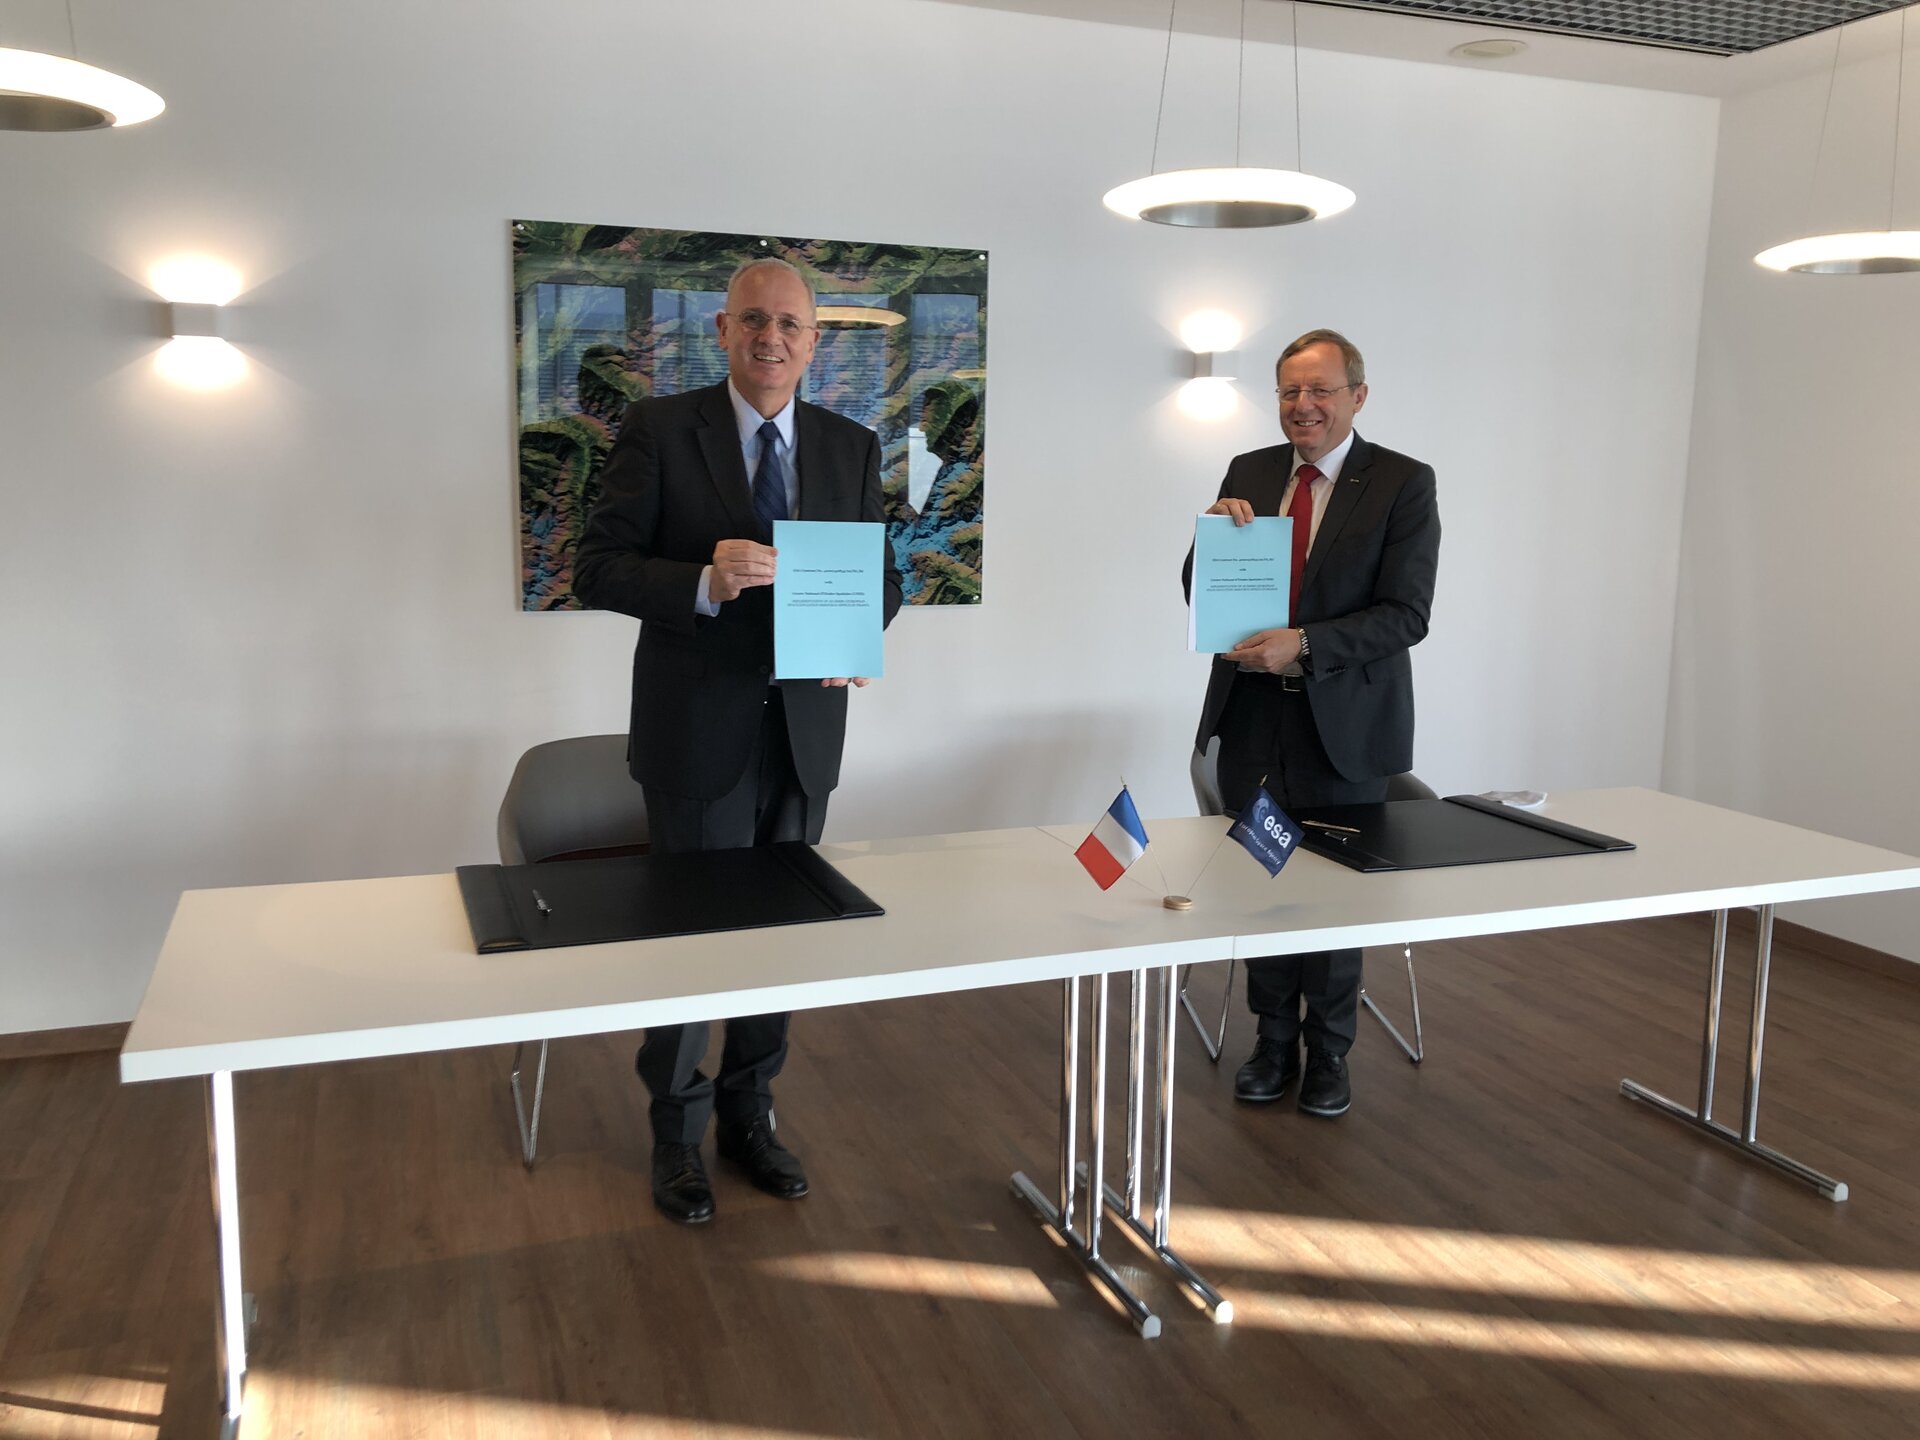 ESERO France contract signing on 23 June 2020